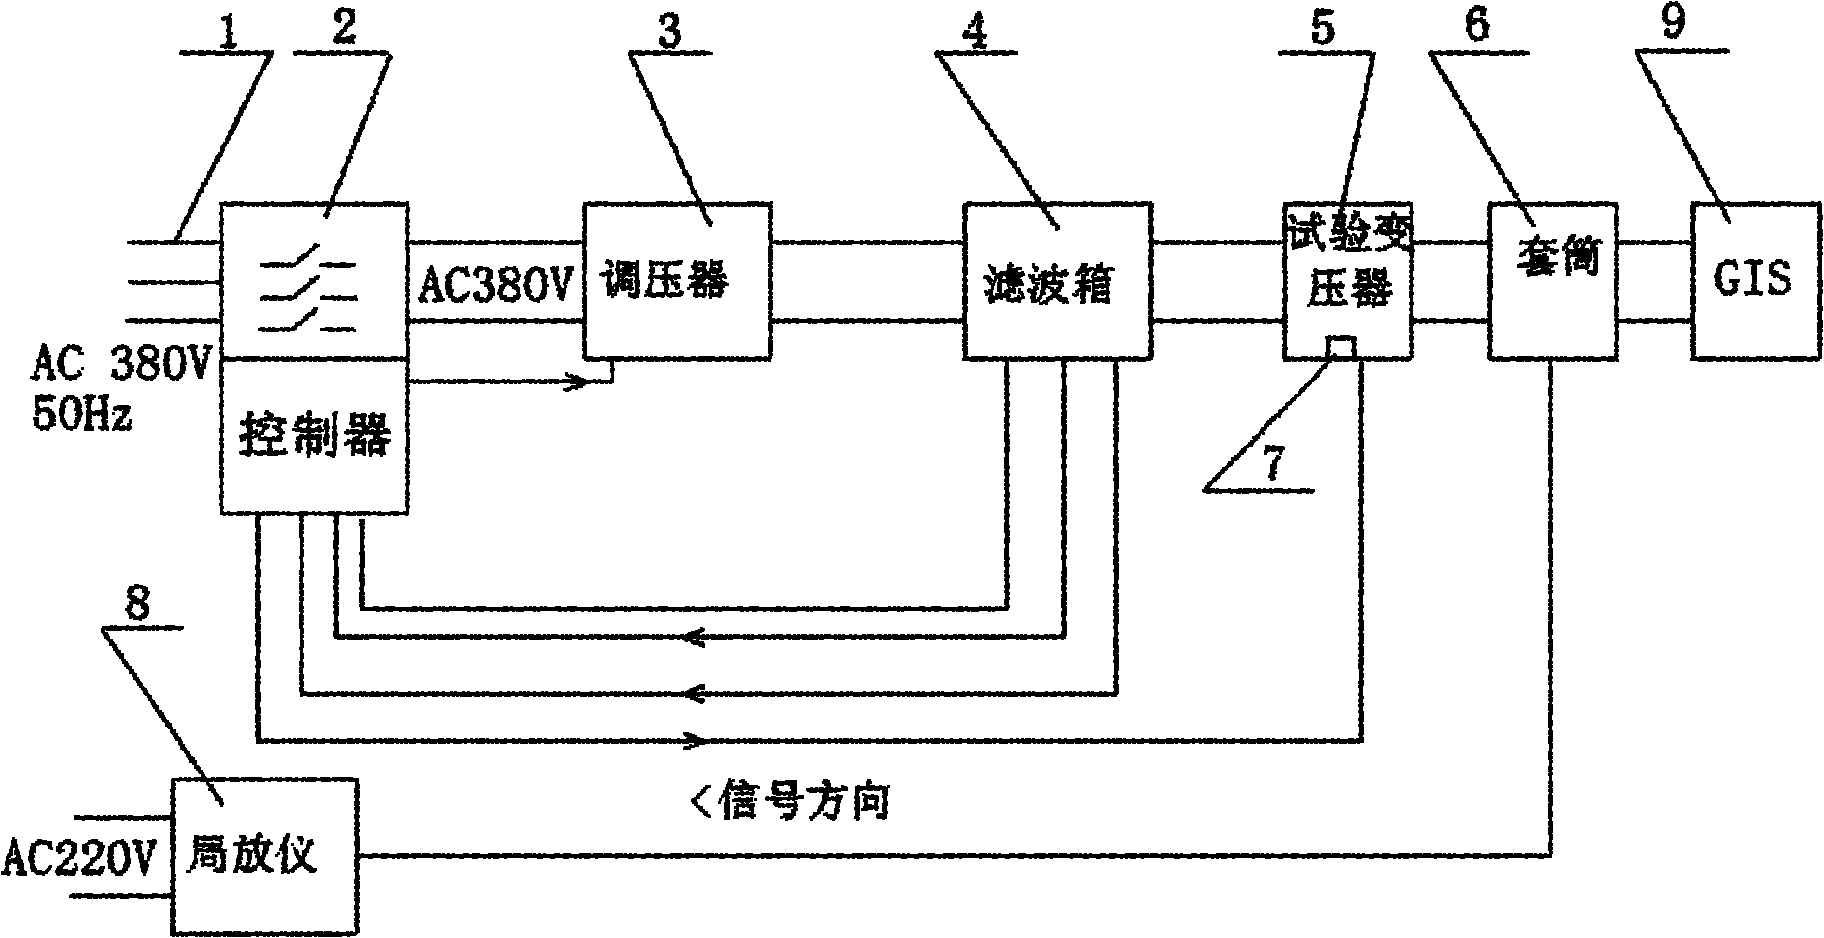 Testing system of gas insulated combined electric appliance equipment